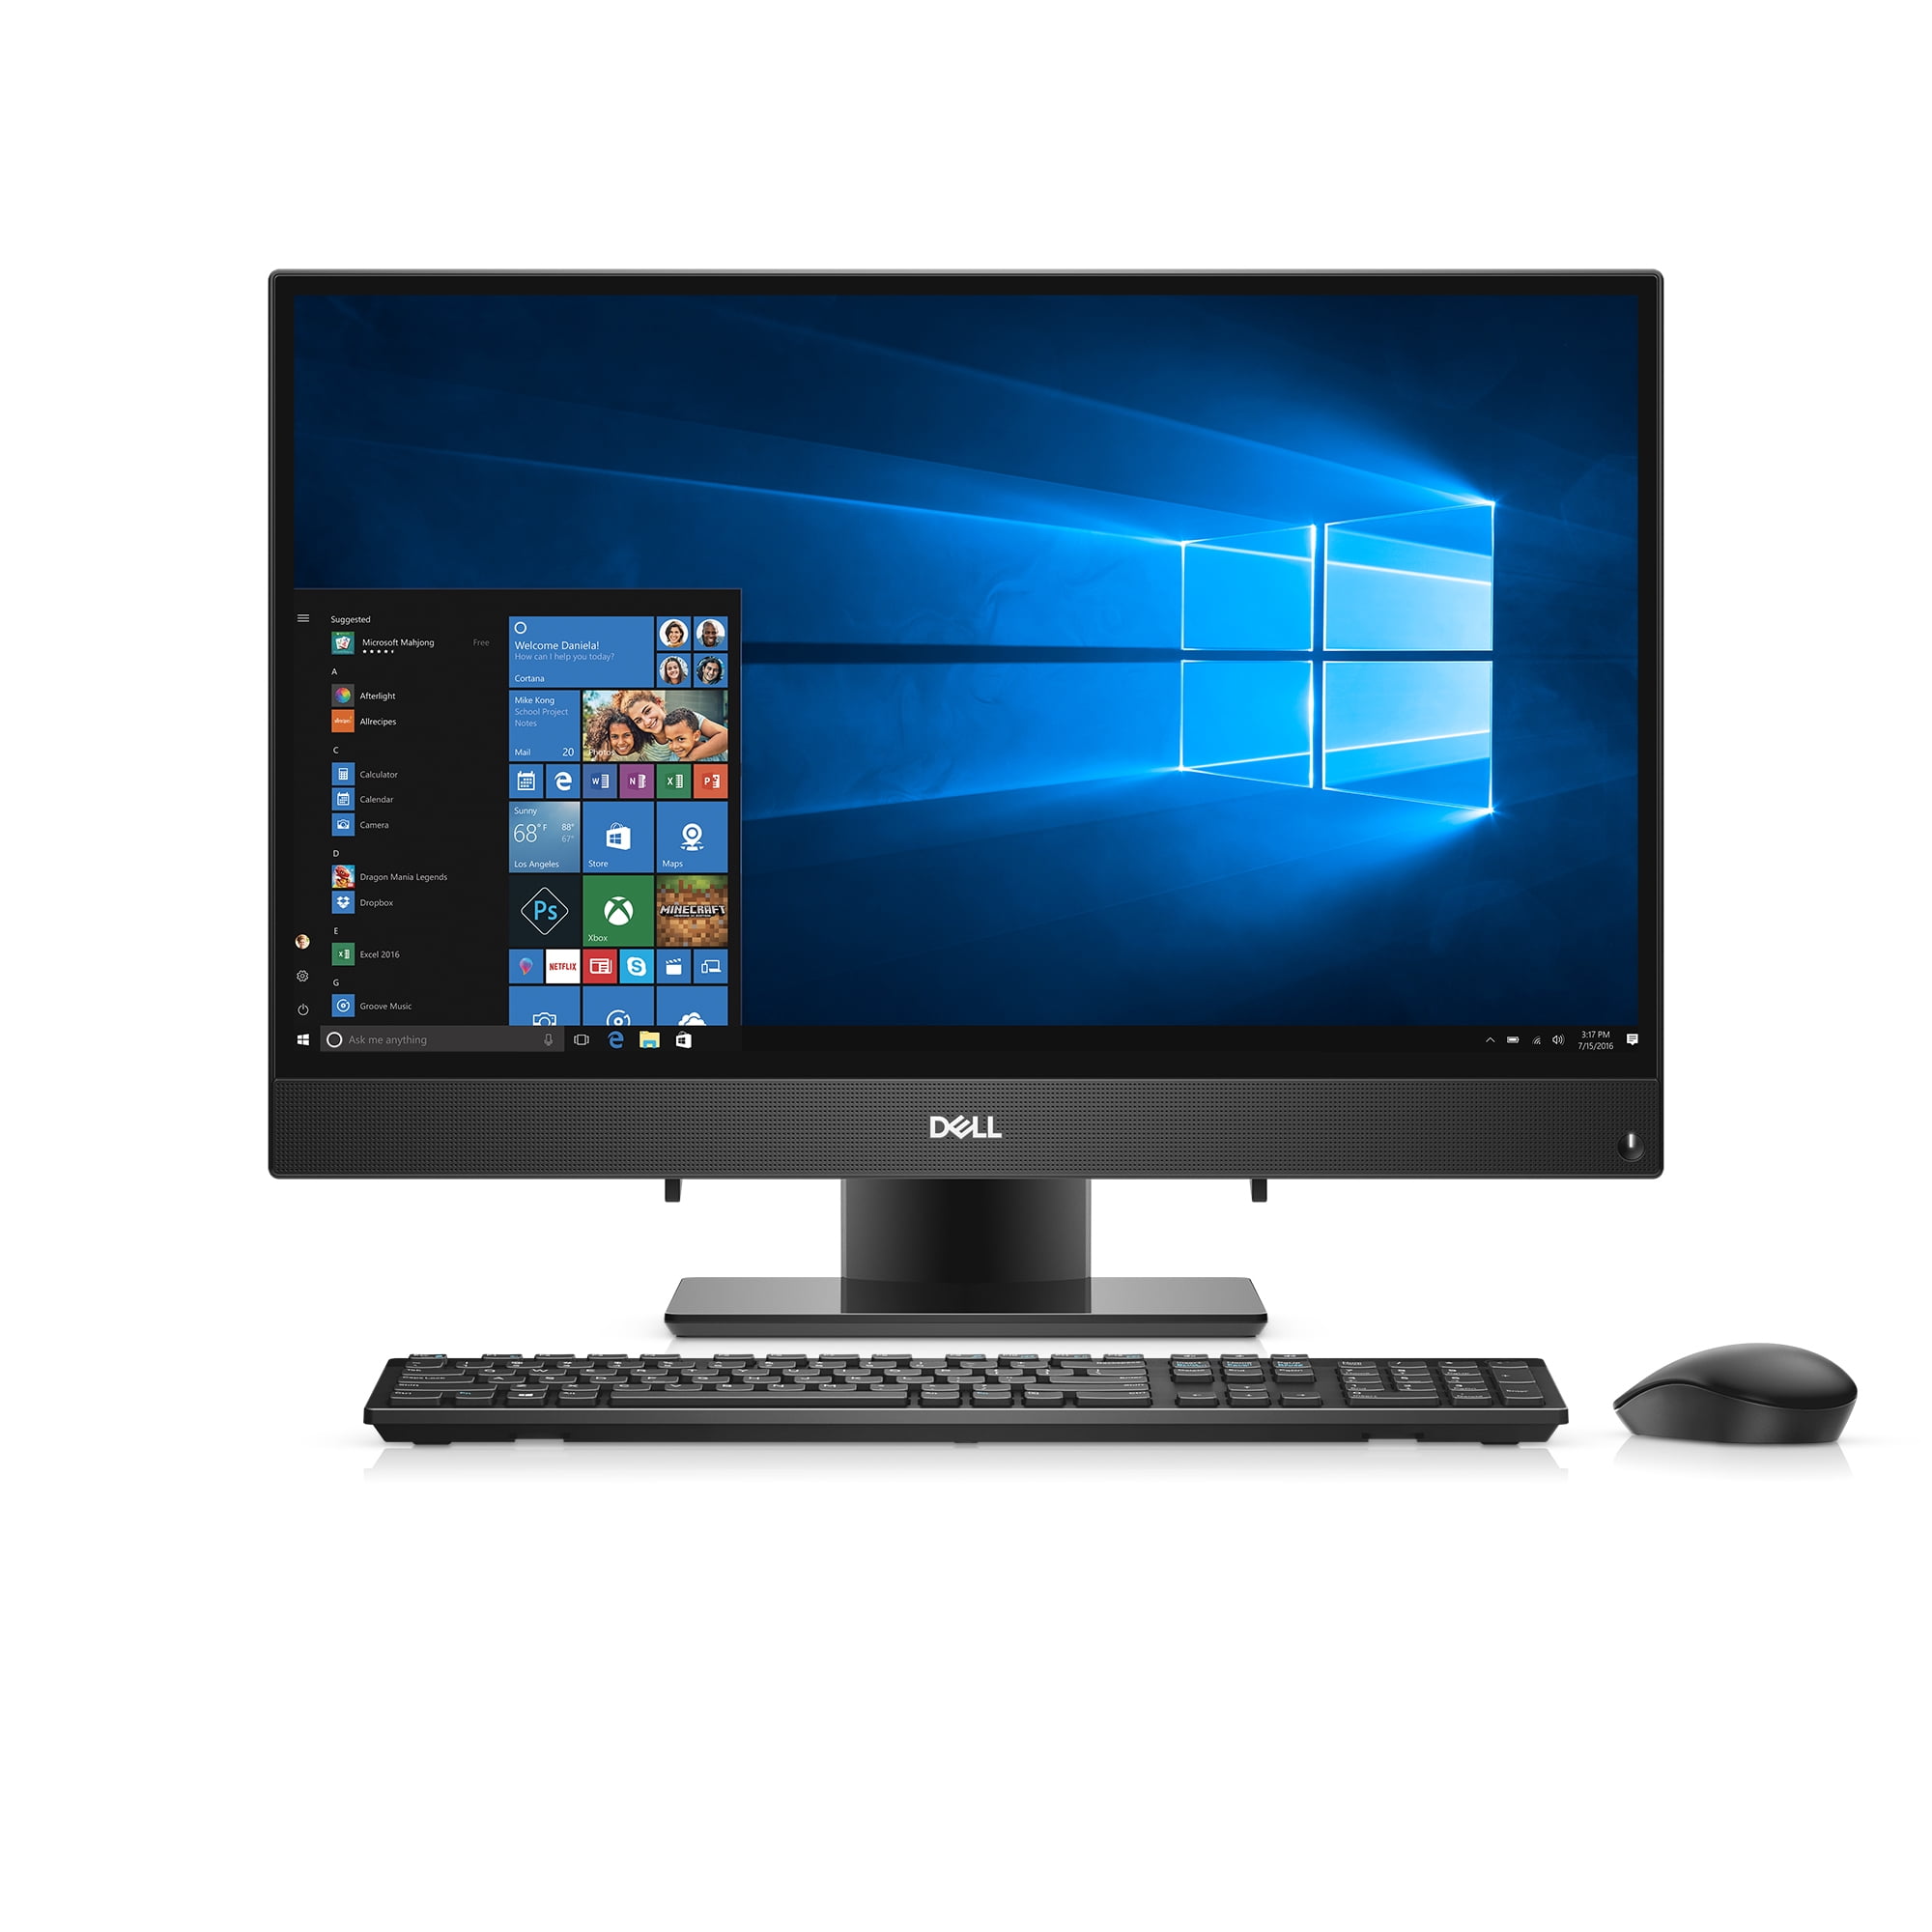 Dell - Inspiron 24 3000 Series All-in-One (AIO) Desktop, '' FHD Touch  Display (1920 x 1080), Intel Core i3-7130U, 8GB 2400MHz DDR4, 1 TB 5400 RPM  HDD, Intel HD Graphics 620, i3477-3869BLK 